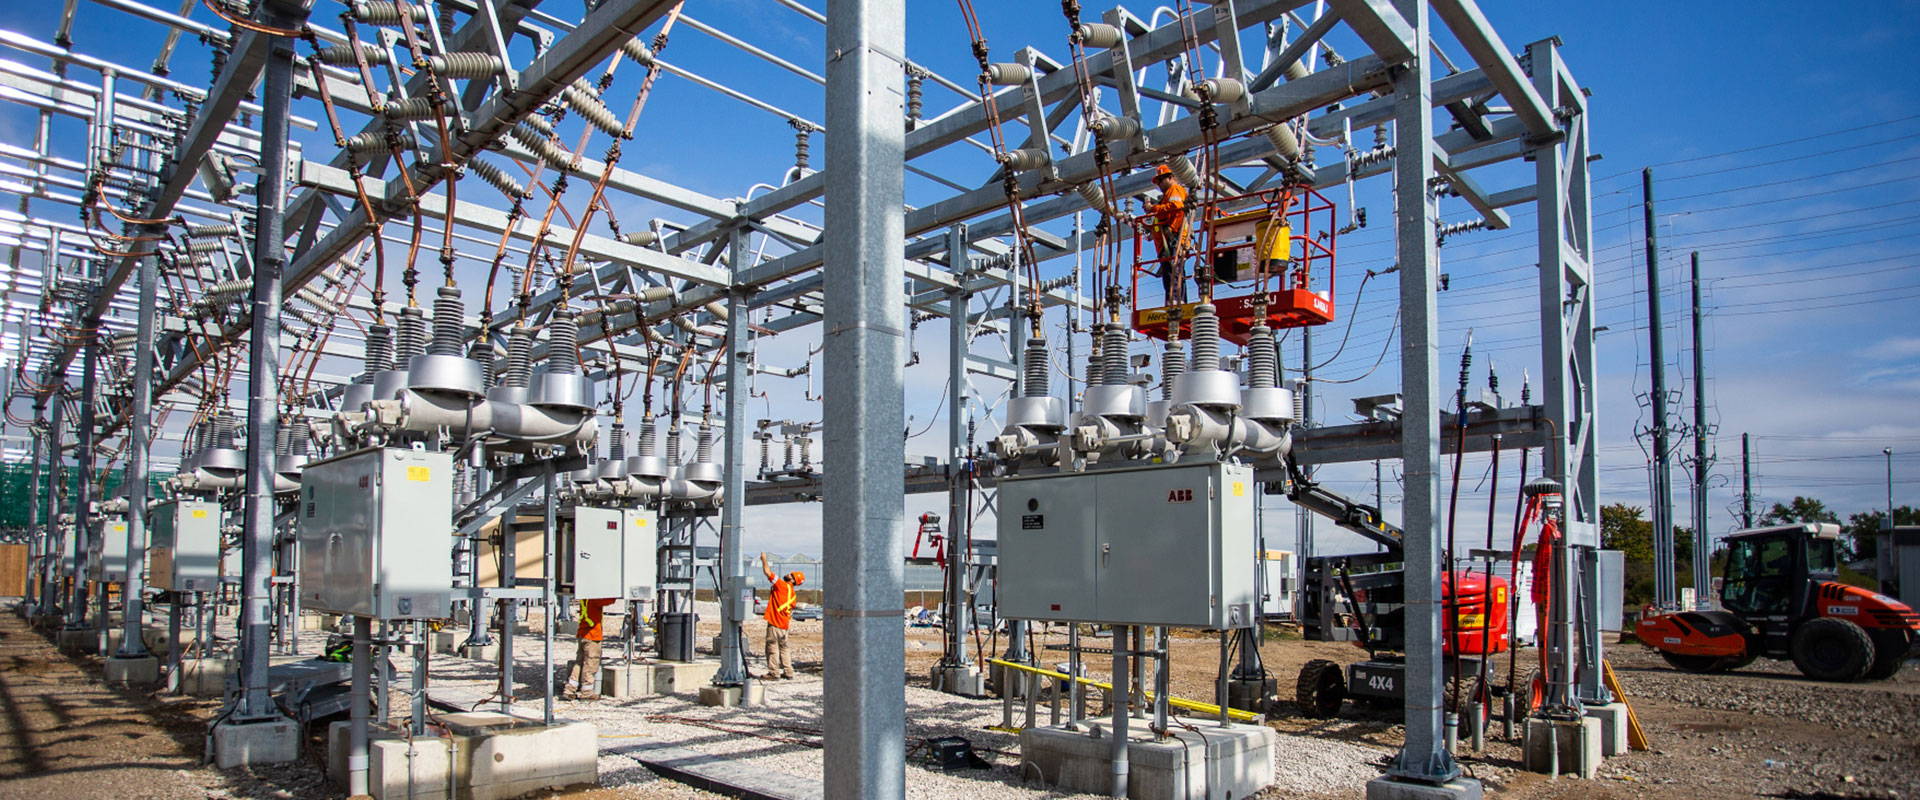 A team of B&M electrical tradespersons working on a construction of a high voltage substation